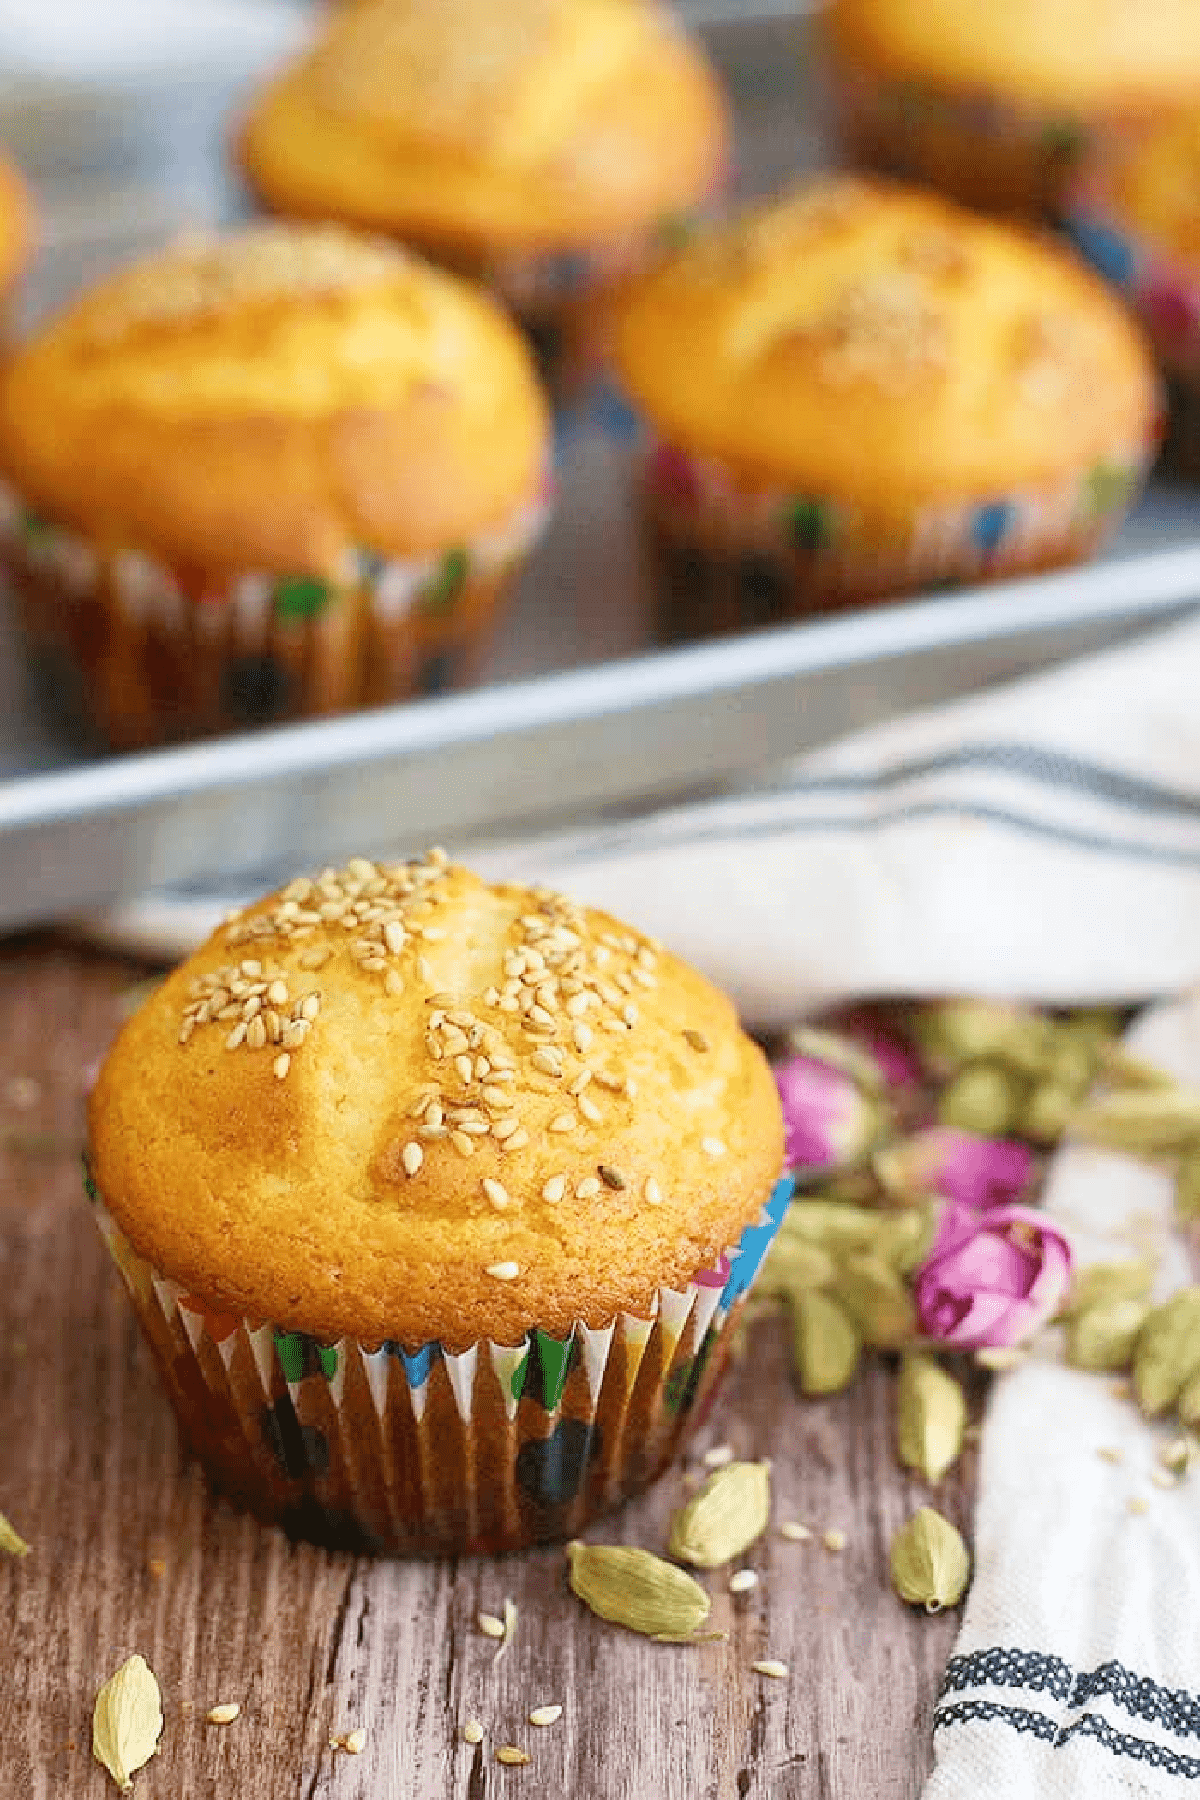 Persian Cardamom Muffins – Cake Yazdi is a traditional Iranian/Persian recipe for delicious muffins that are filled with Persian flavors. The combination of rose water and cardamom is always great.
